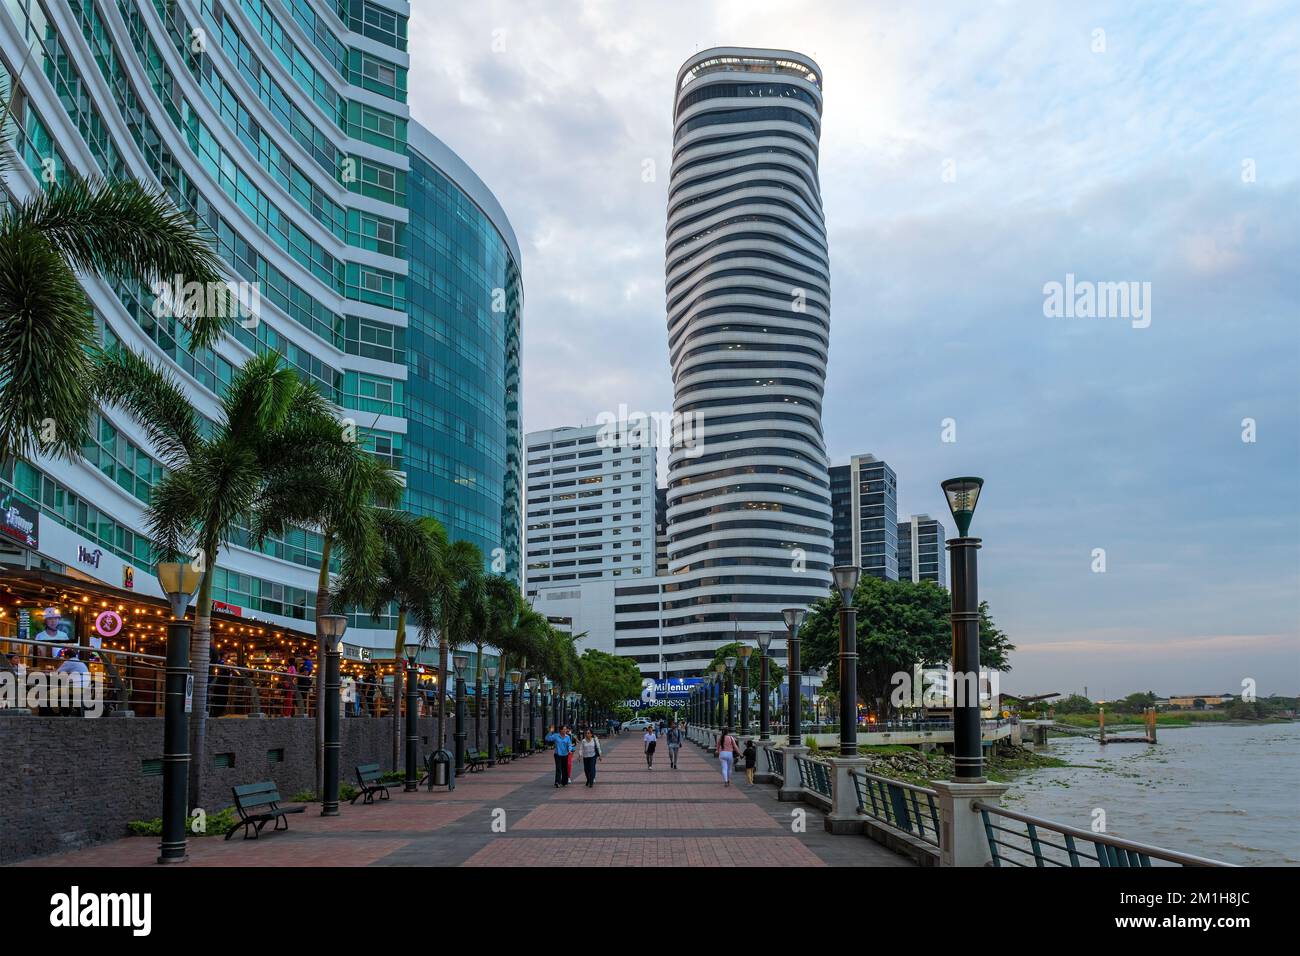 Cityscape of the Malecon 2000 waterfront promenade along Guayas river with modern buildings, Guayaquil, Ecuador. Stock Photo